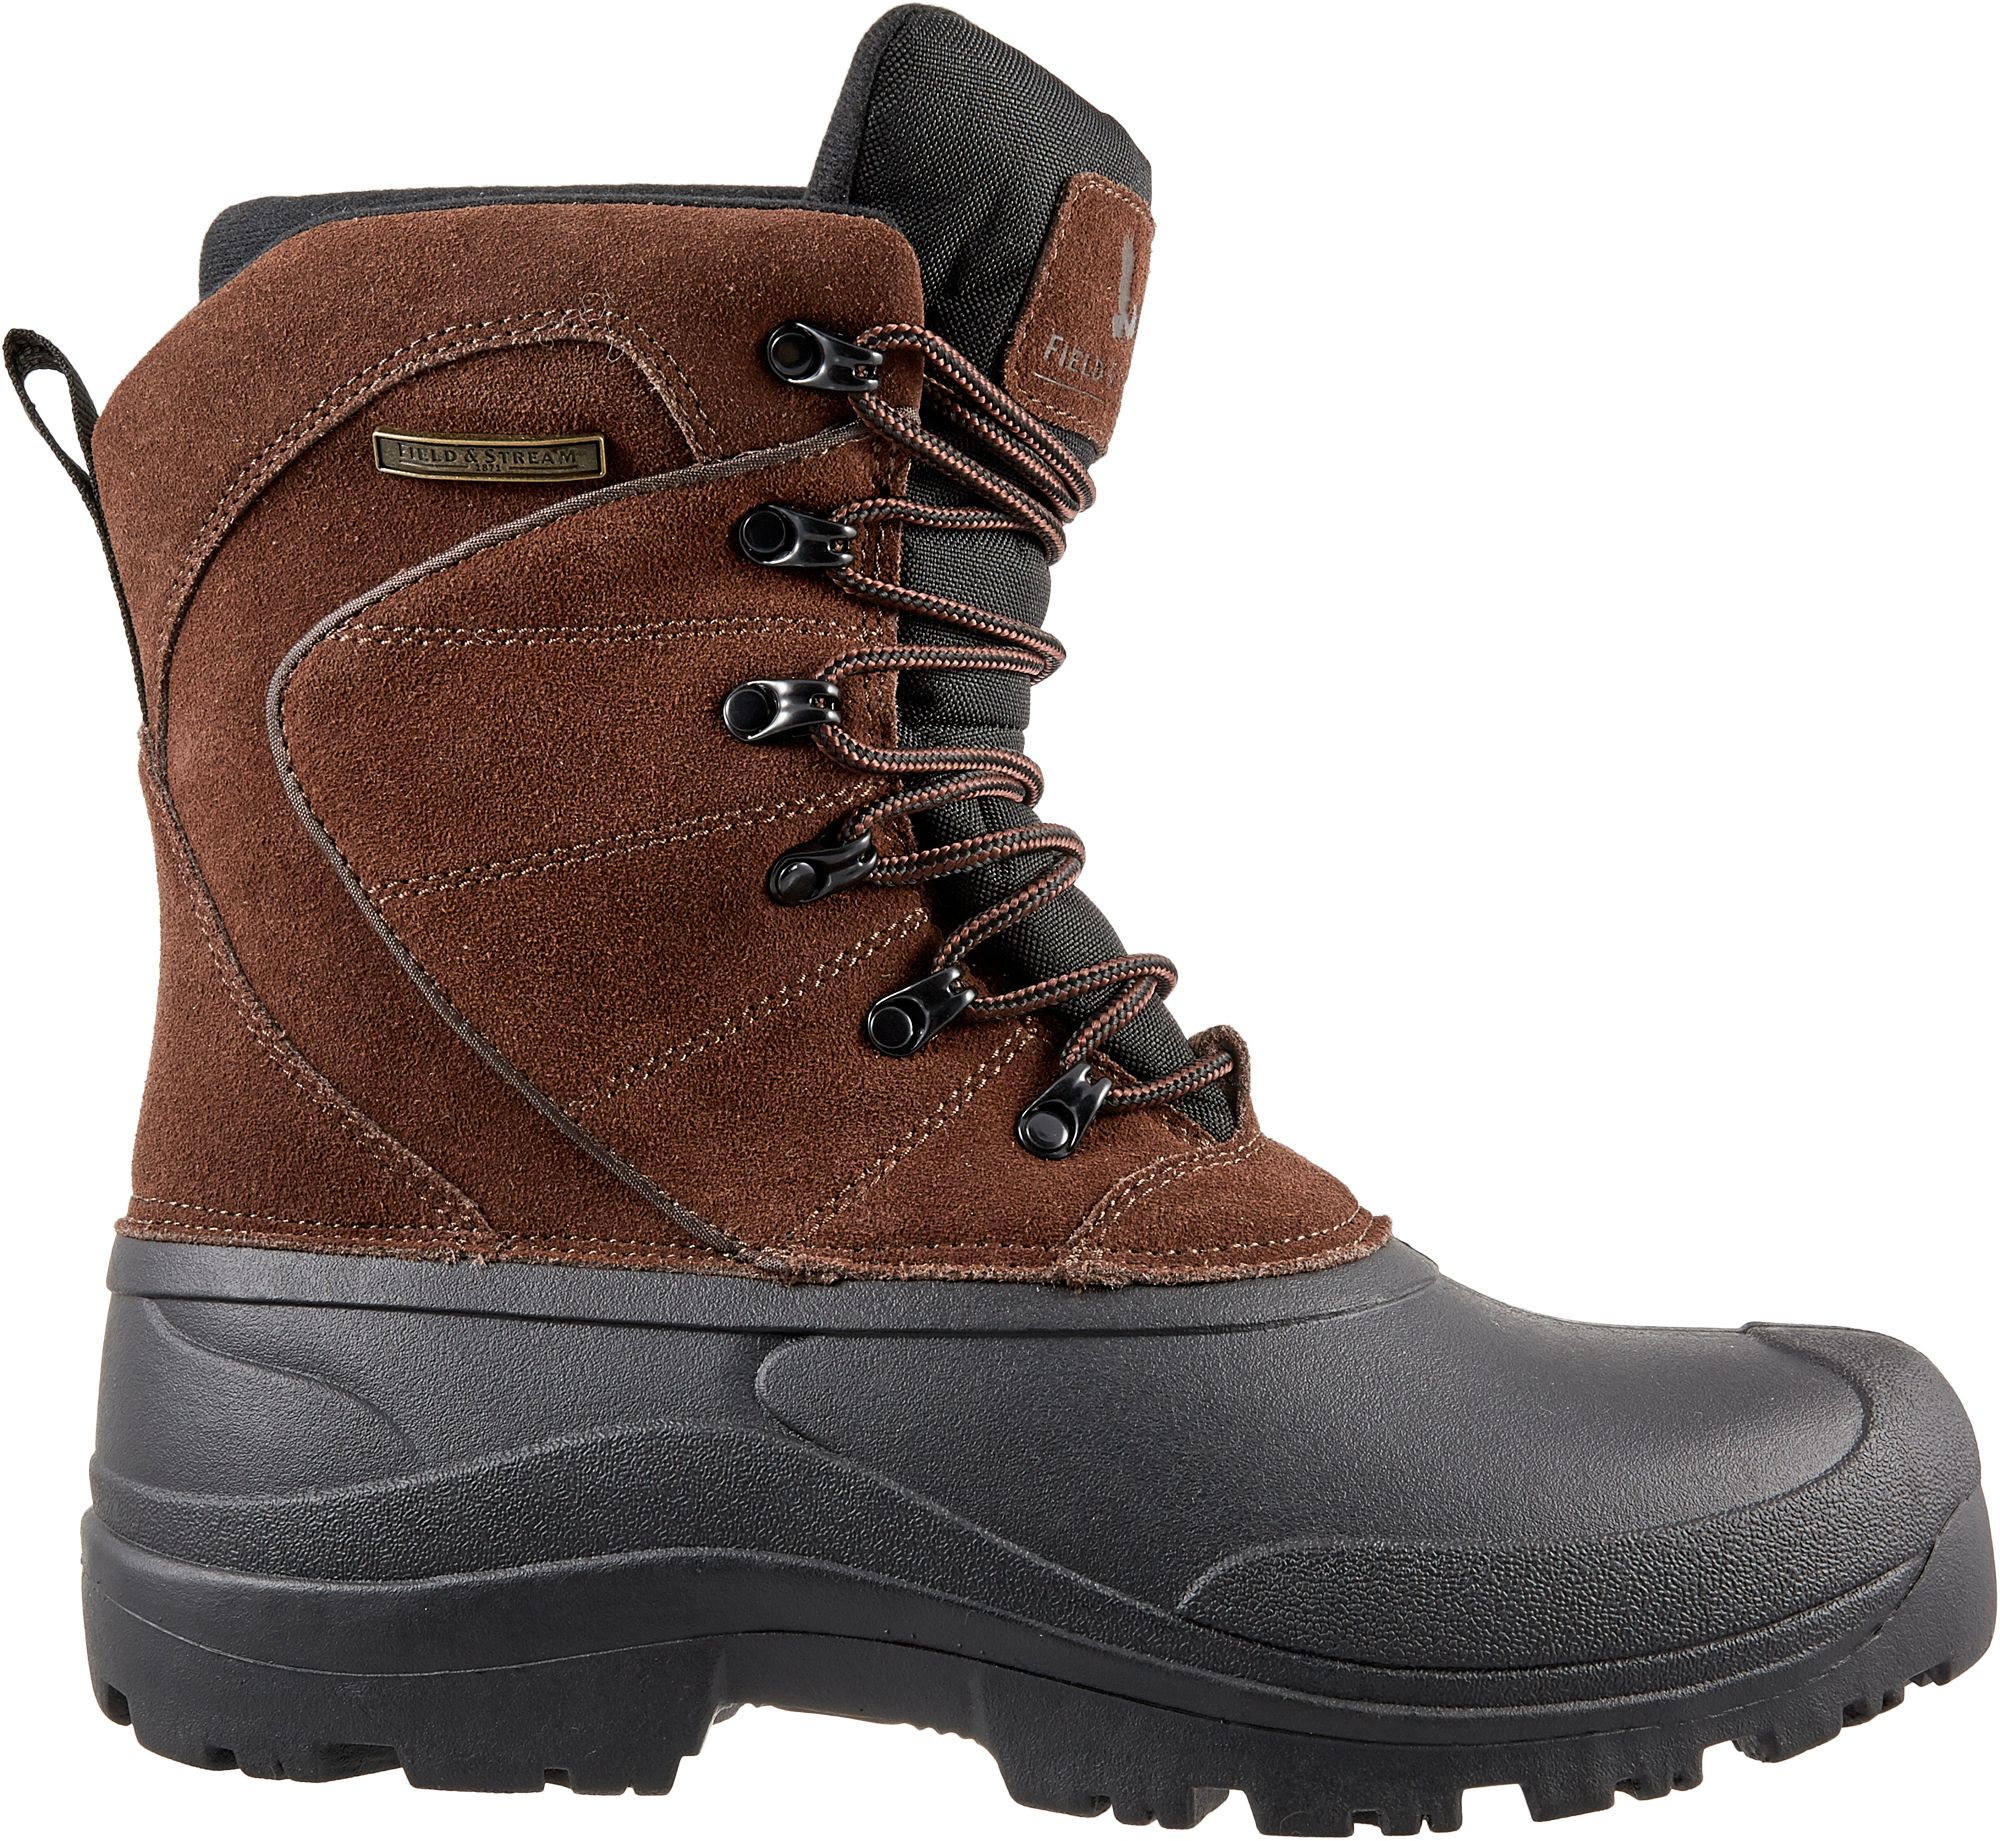 winter boots 400g insulated